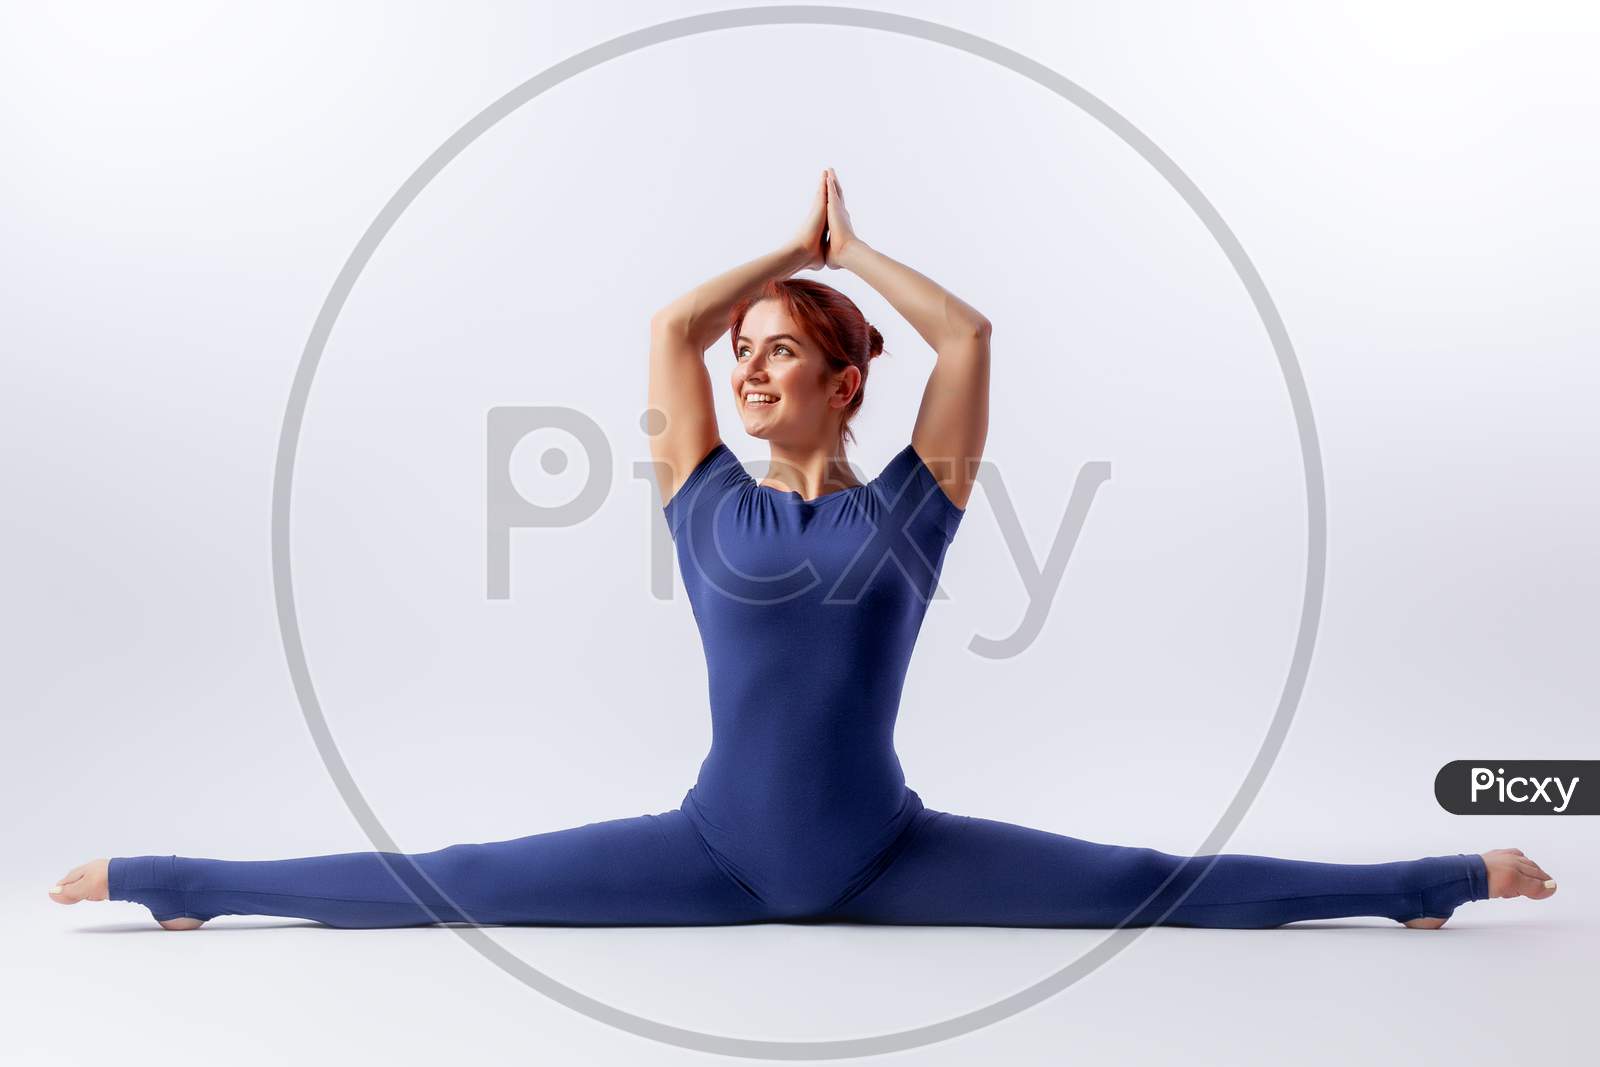 Beautiful Slim Woman In Sports Overalls  Doing Yoga, Standing In An Asana Pose - Twine  On White  Isolated Background. The Concept Of Sports And Meditation. Training For Stretching And Yoga